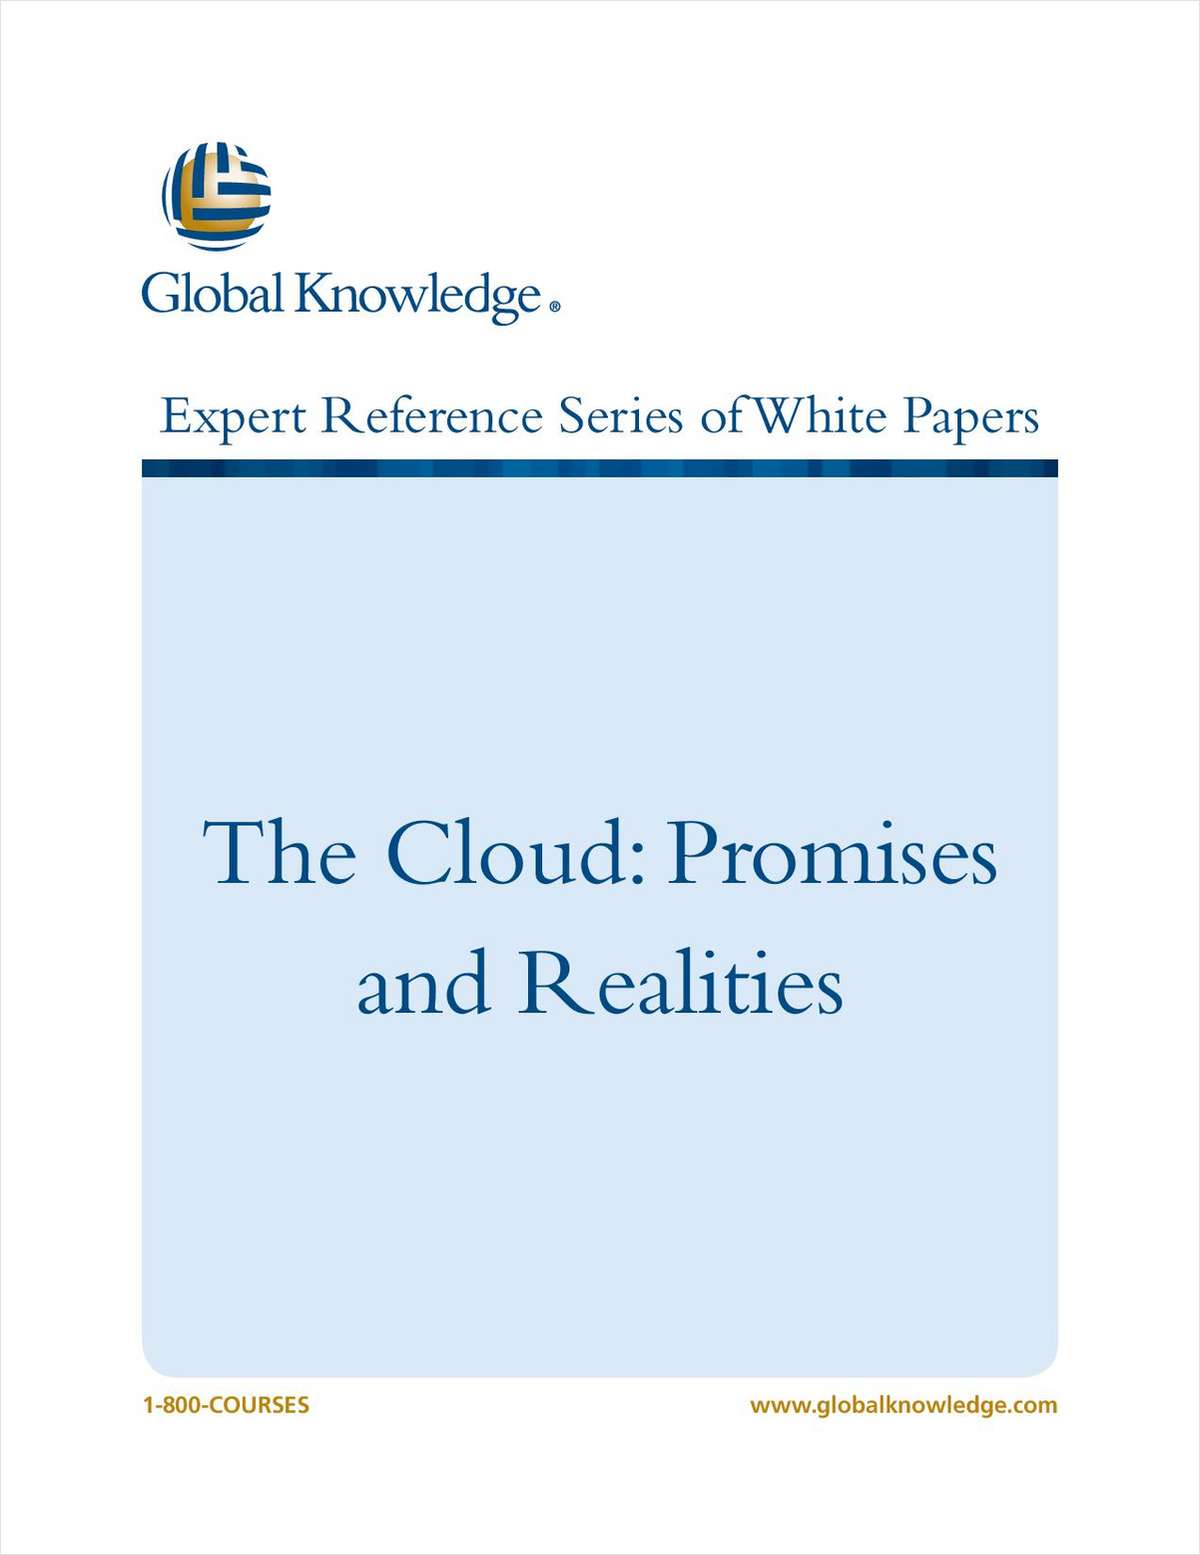 The Cloud: Promises and Realities